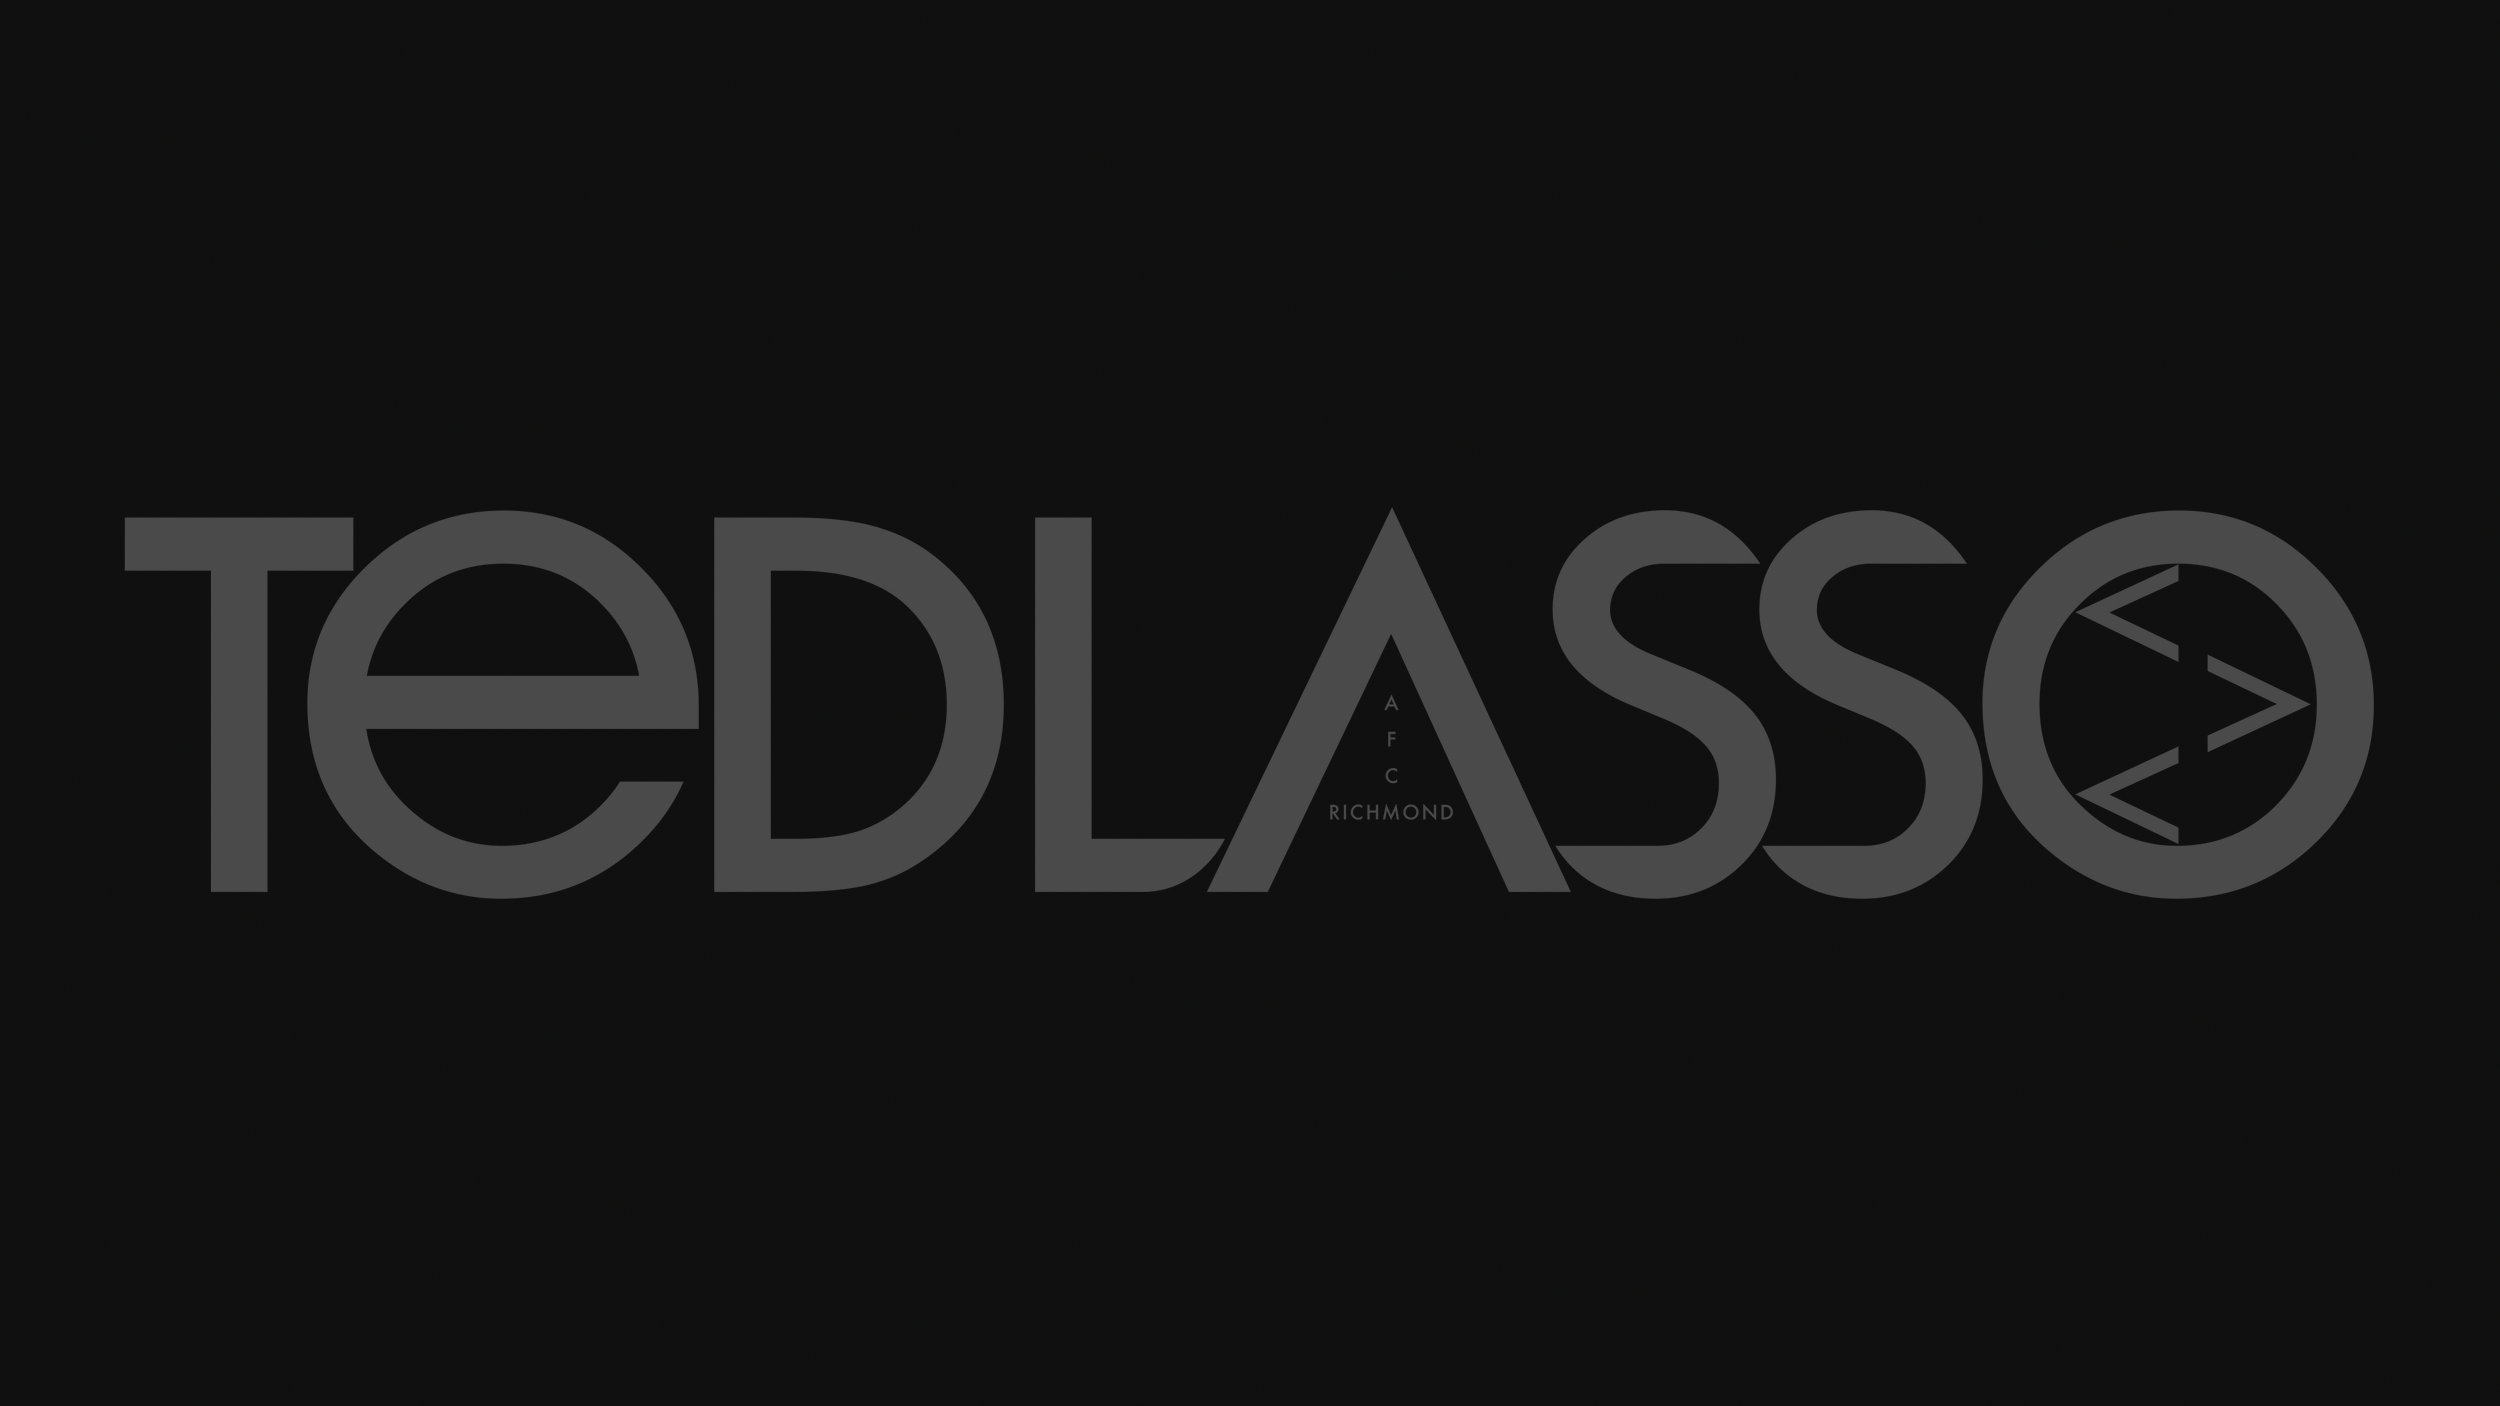 ted_lasso_logo_med_gray.png